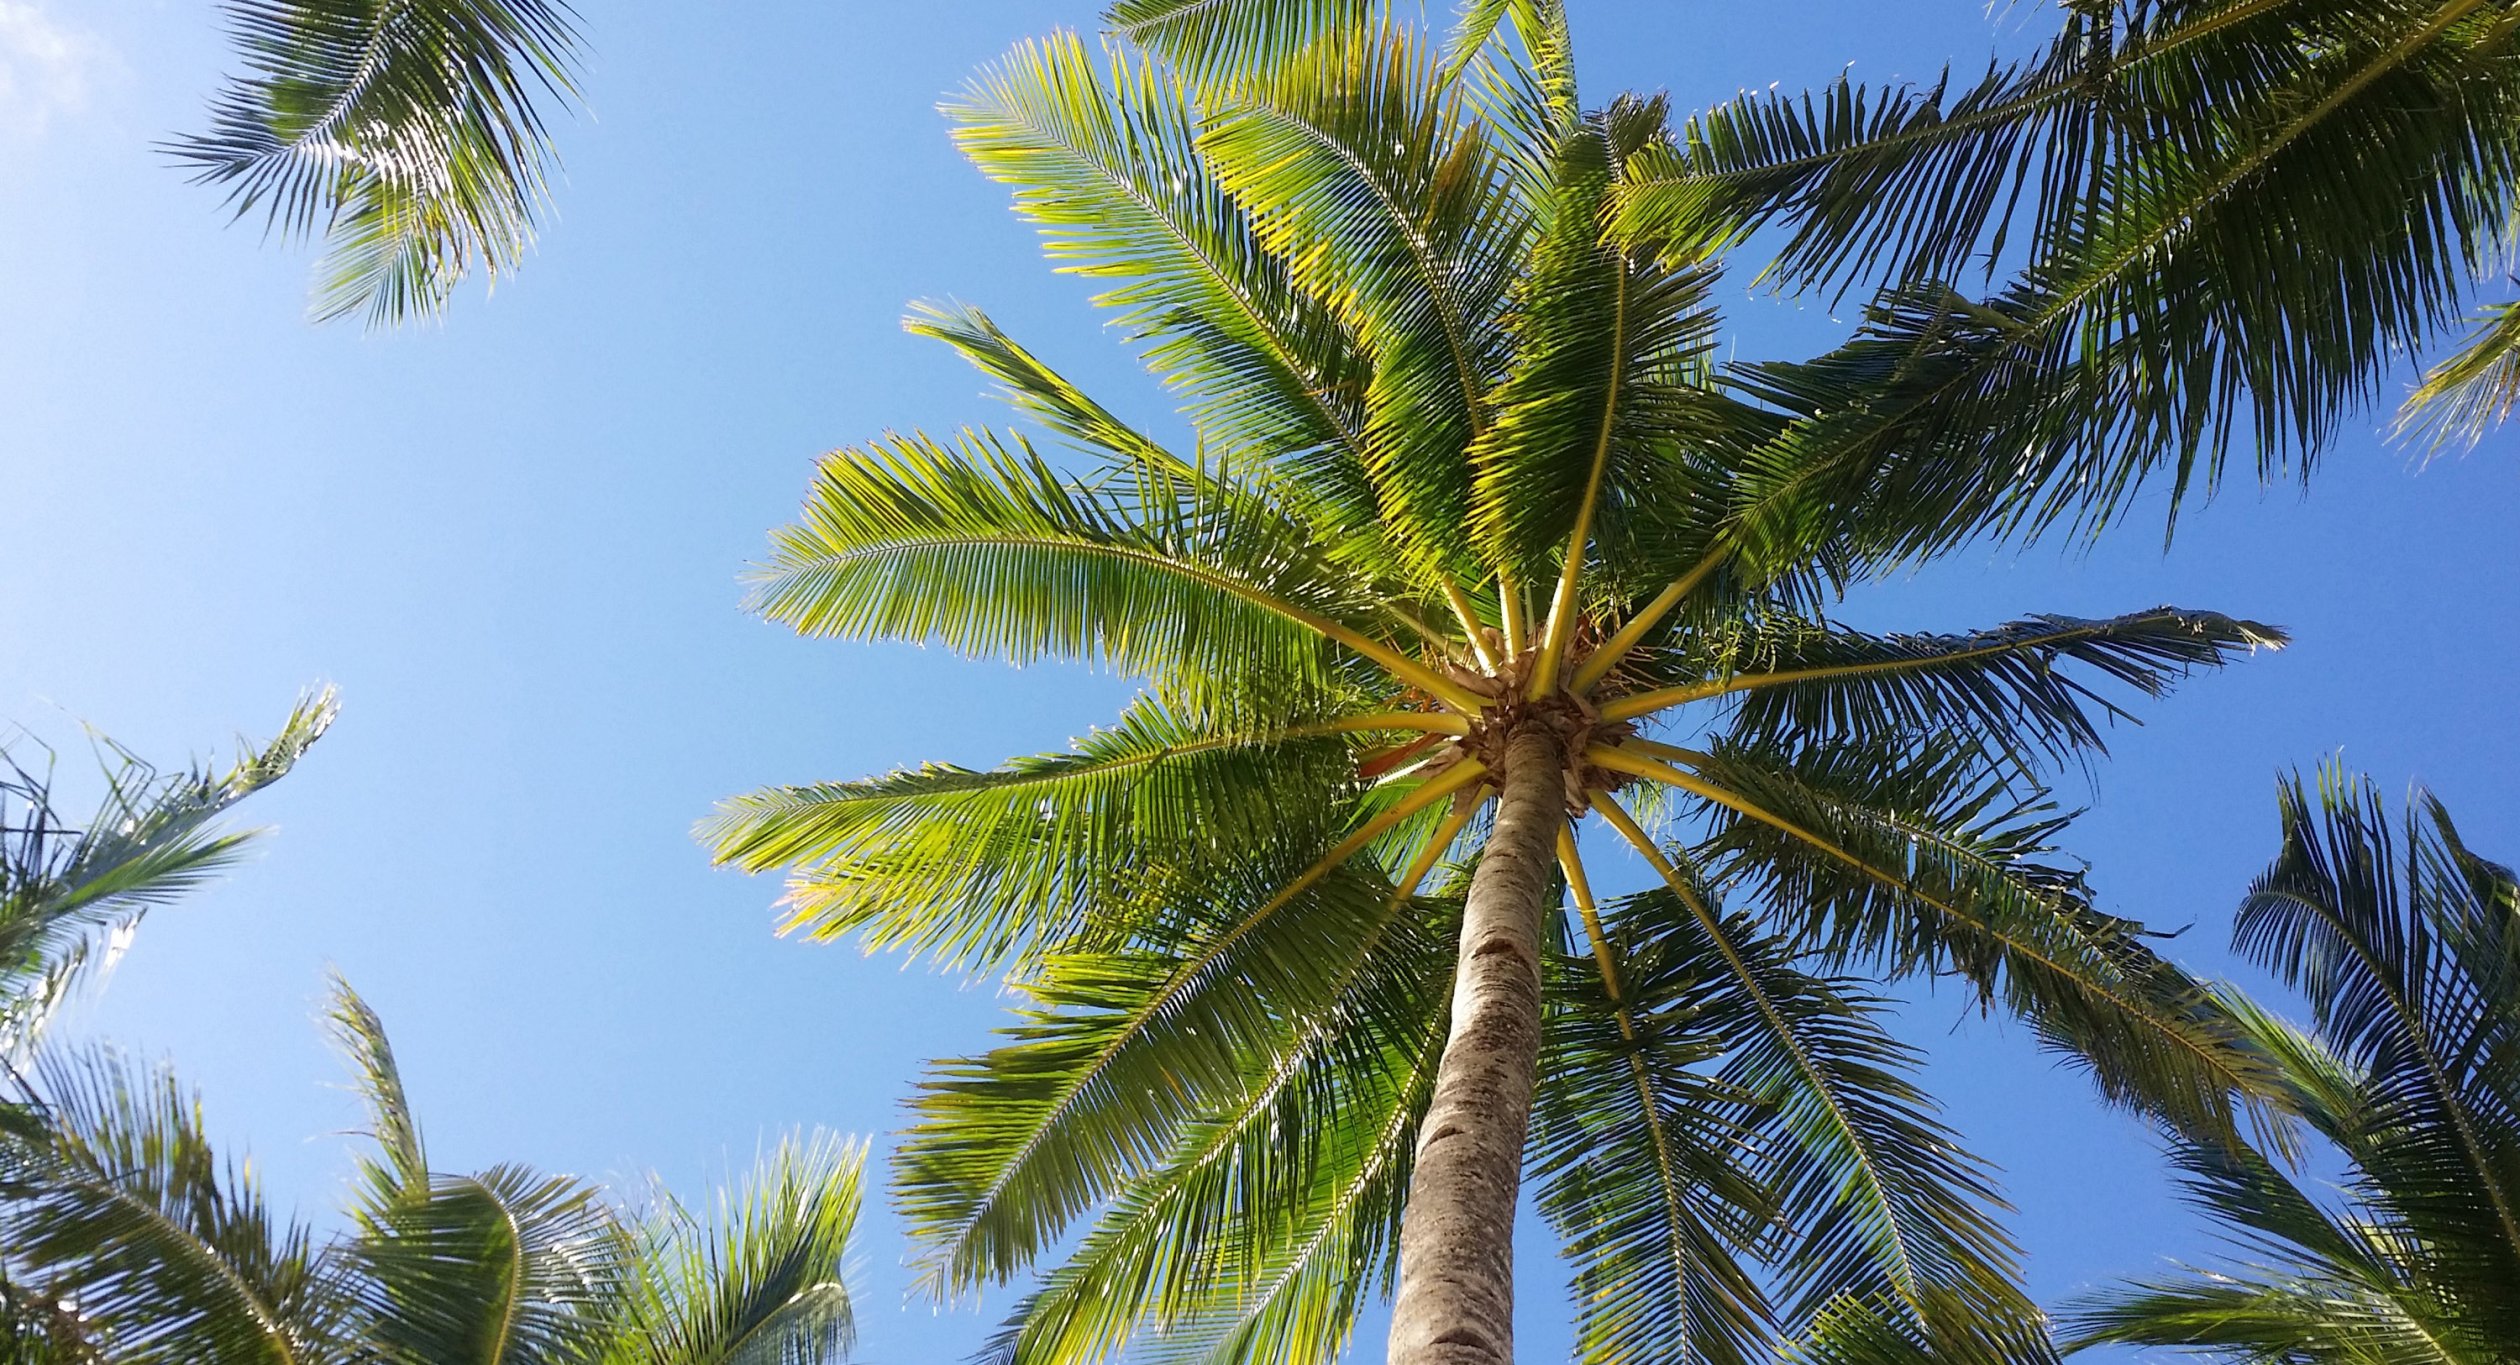 Group of palm trees against a blue sky.